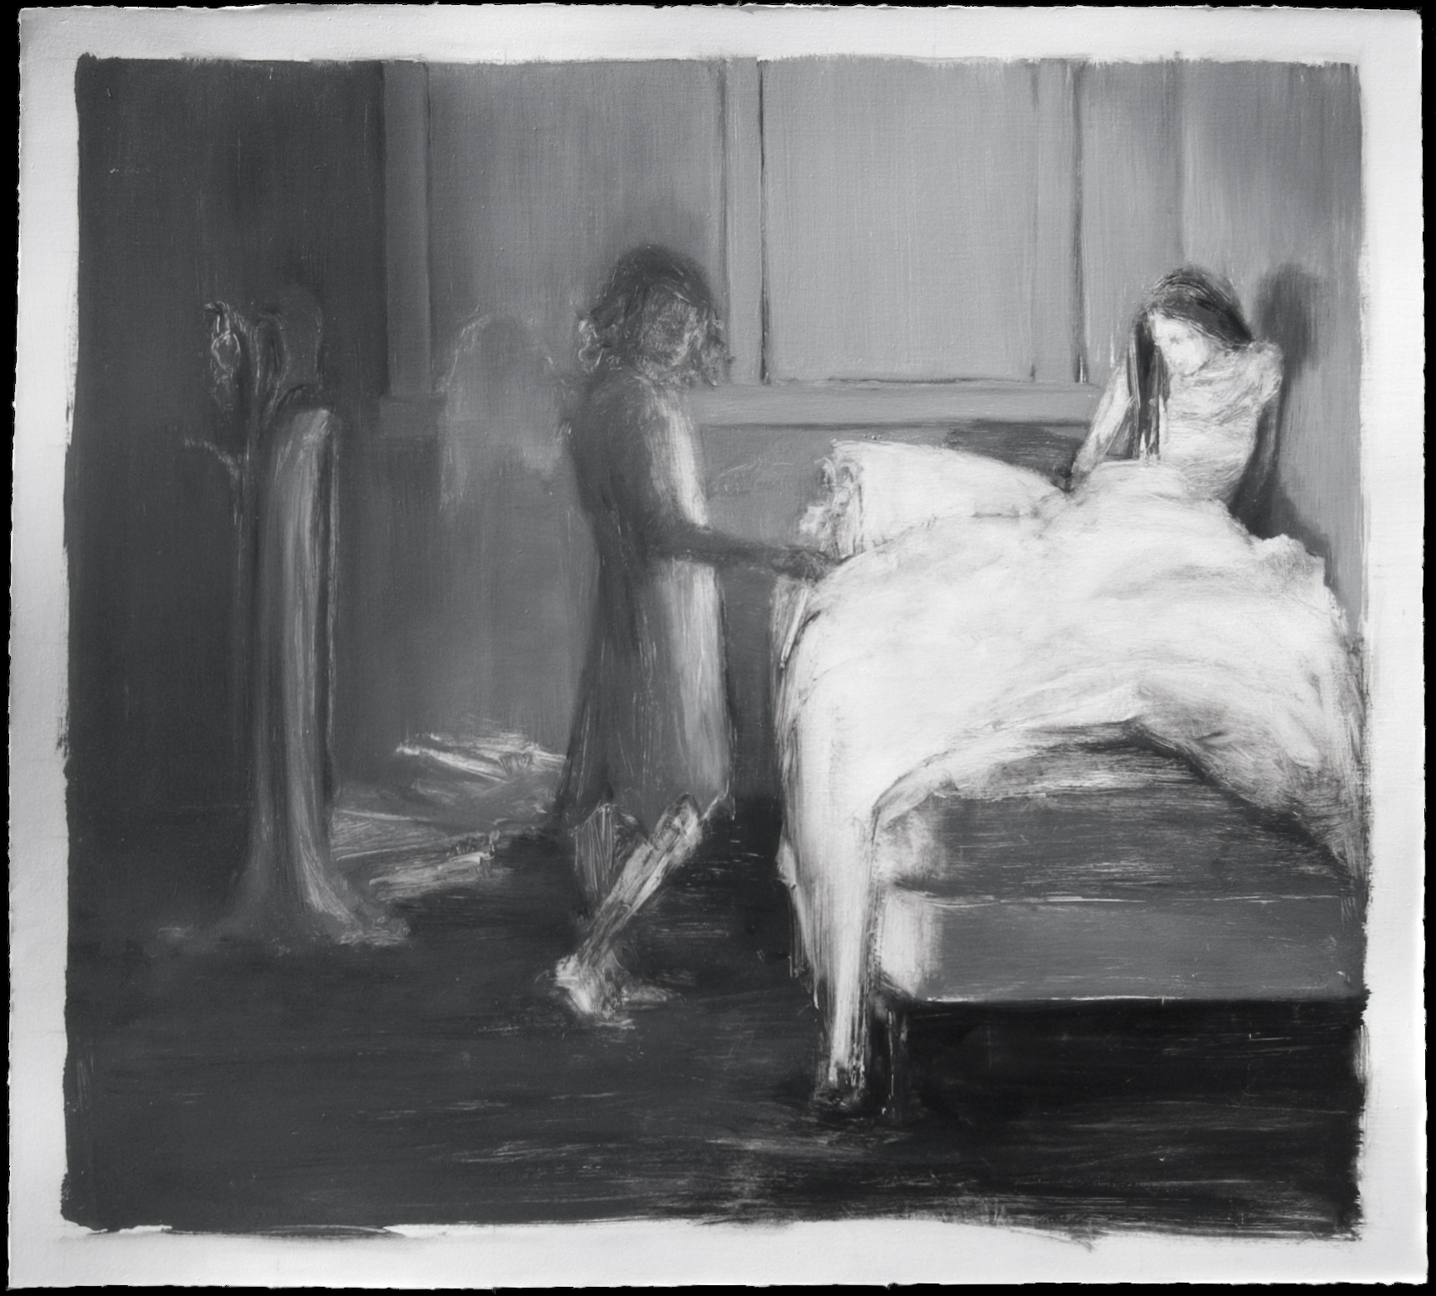    The white painting   , 2008,   oil on paper, 14 1/4 x 15 1/2 in.  